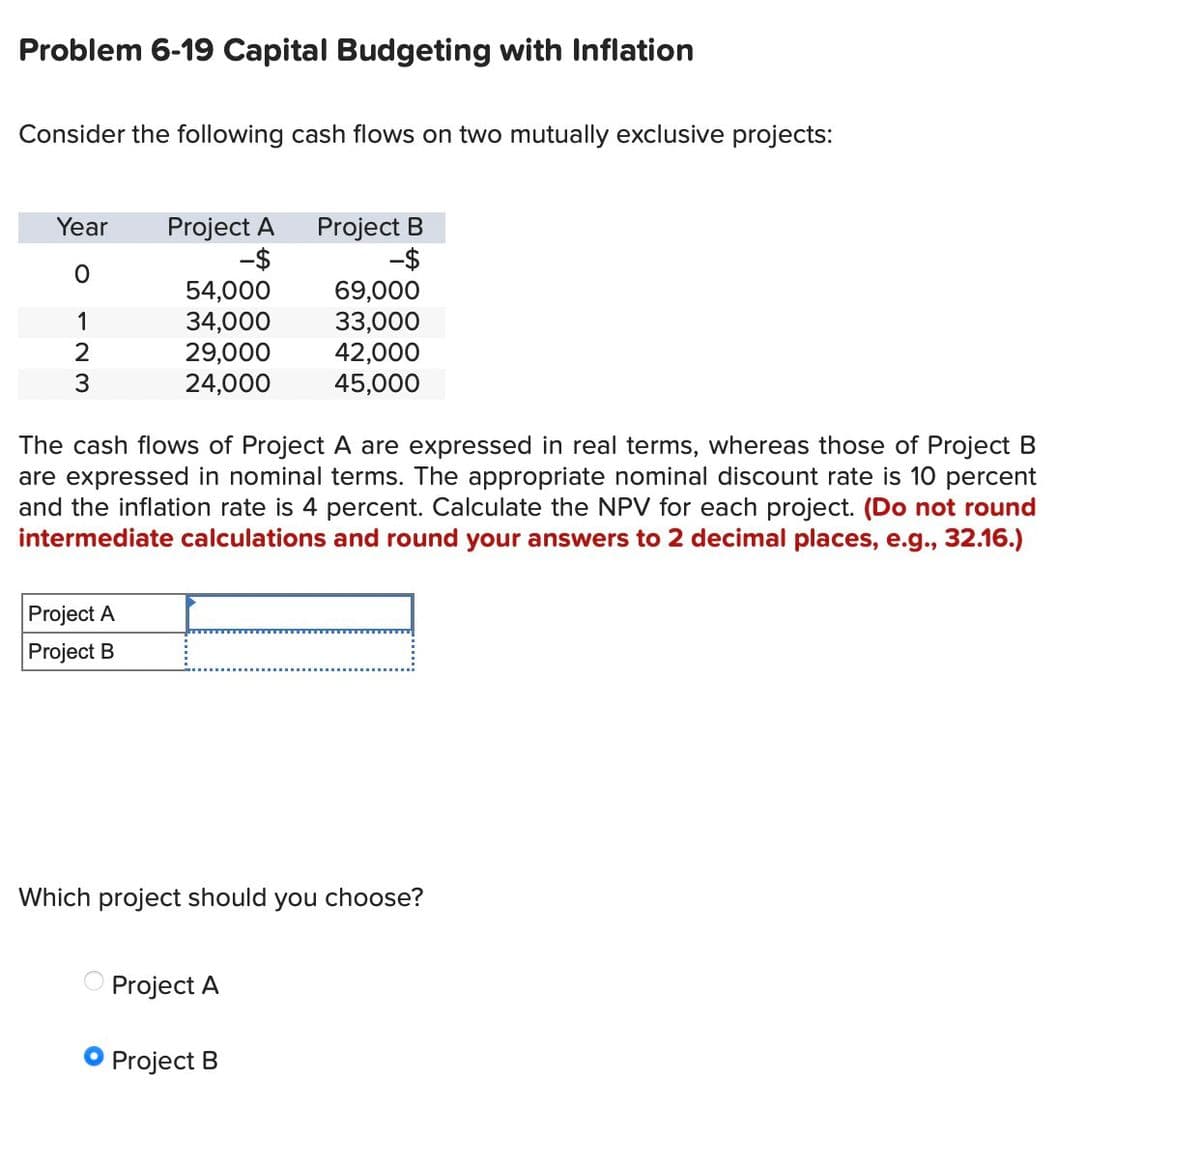 Problem 6-19 Capital Budgeting with Inflation
Consider the following cash flows on two mutually exclusive projects:
Year
Project A
-$
Project B
-$
0
54,000
69,000
1
34,000
33,000
2
29,000
42,000
3
24,000
45,000
The cash flows of Project A are expressed in real terms, whereas those of Project B
are expressed in nominal terms. The appropriate nominal discount rate is 10 percent
and the inflation rate is 4 percent. Calculate the NPV for each project. (Do not round
intermediate calculations and round your answers to 2 decimal places, e.g., 32.16.)
Project A
Project B
Which project should you choose?
Project A
Project B